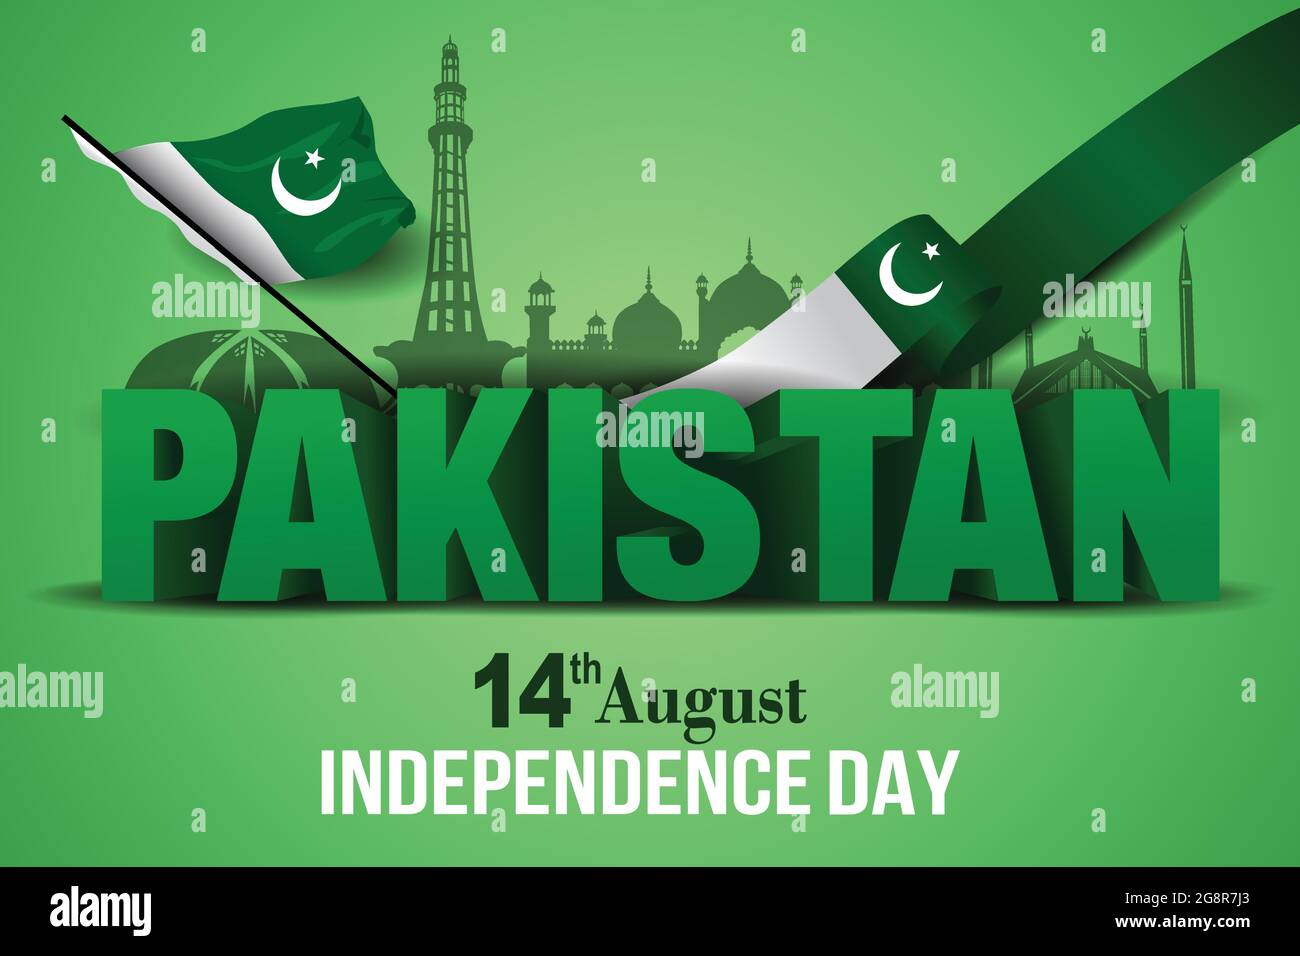 happy independence day pakistan. vector illustration of Pakistan flag